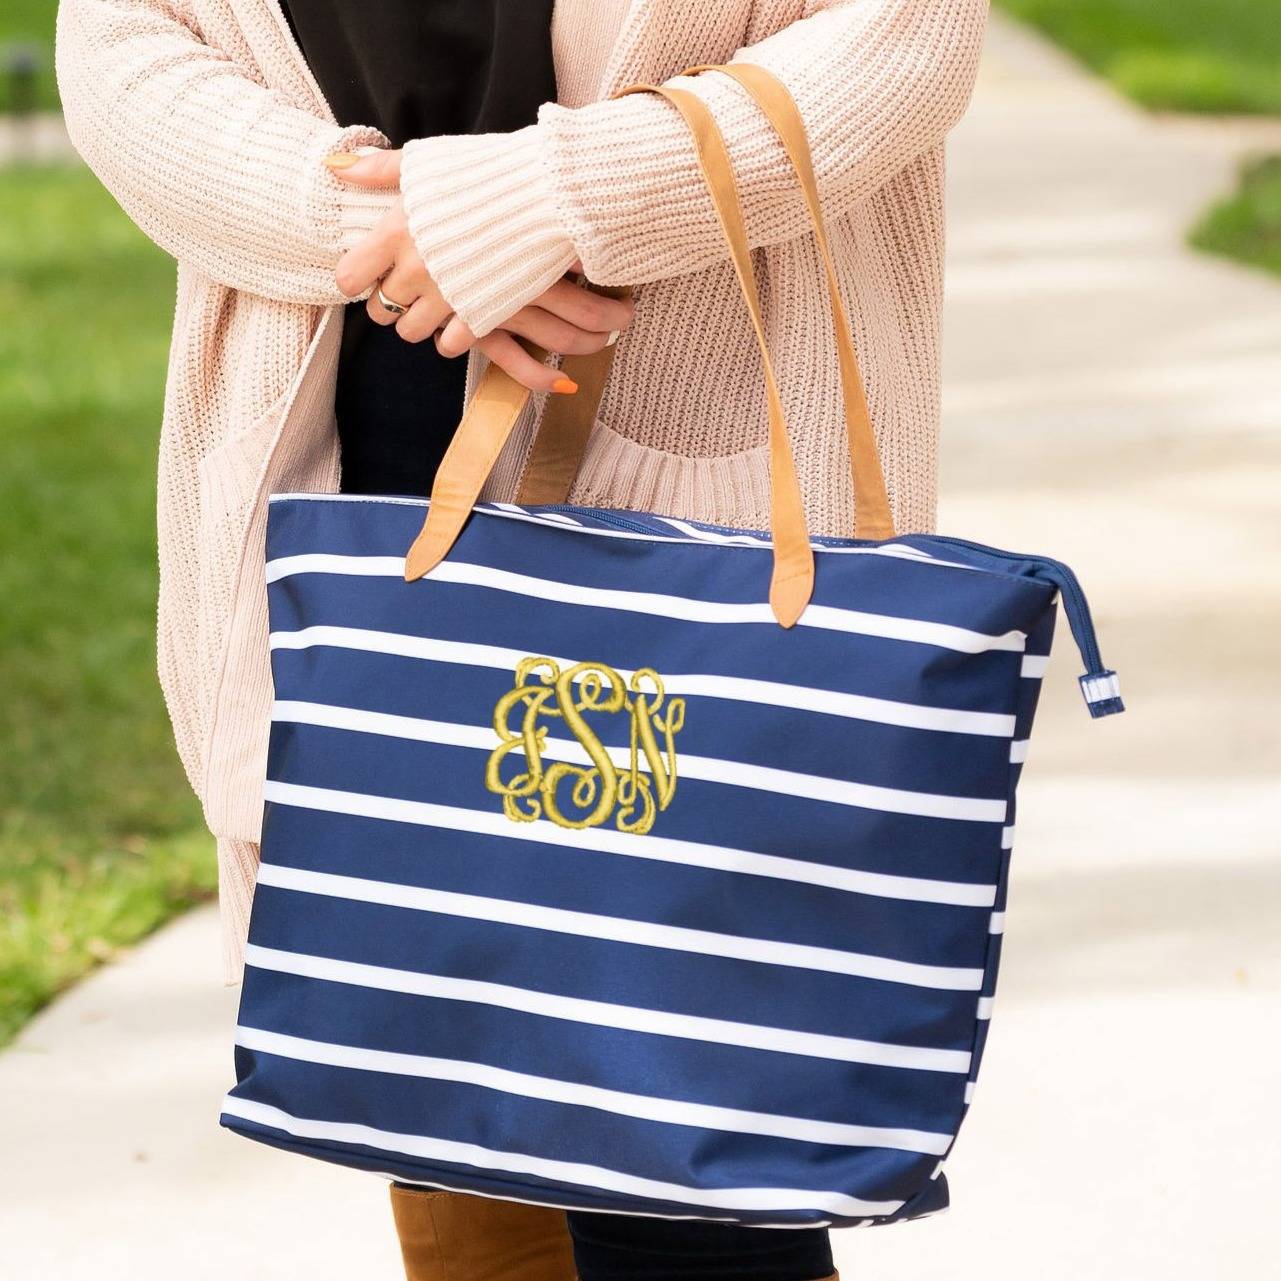 Monogrammed Tote Bags & Personalized Beach Bags | Gifts Happen Here ...